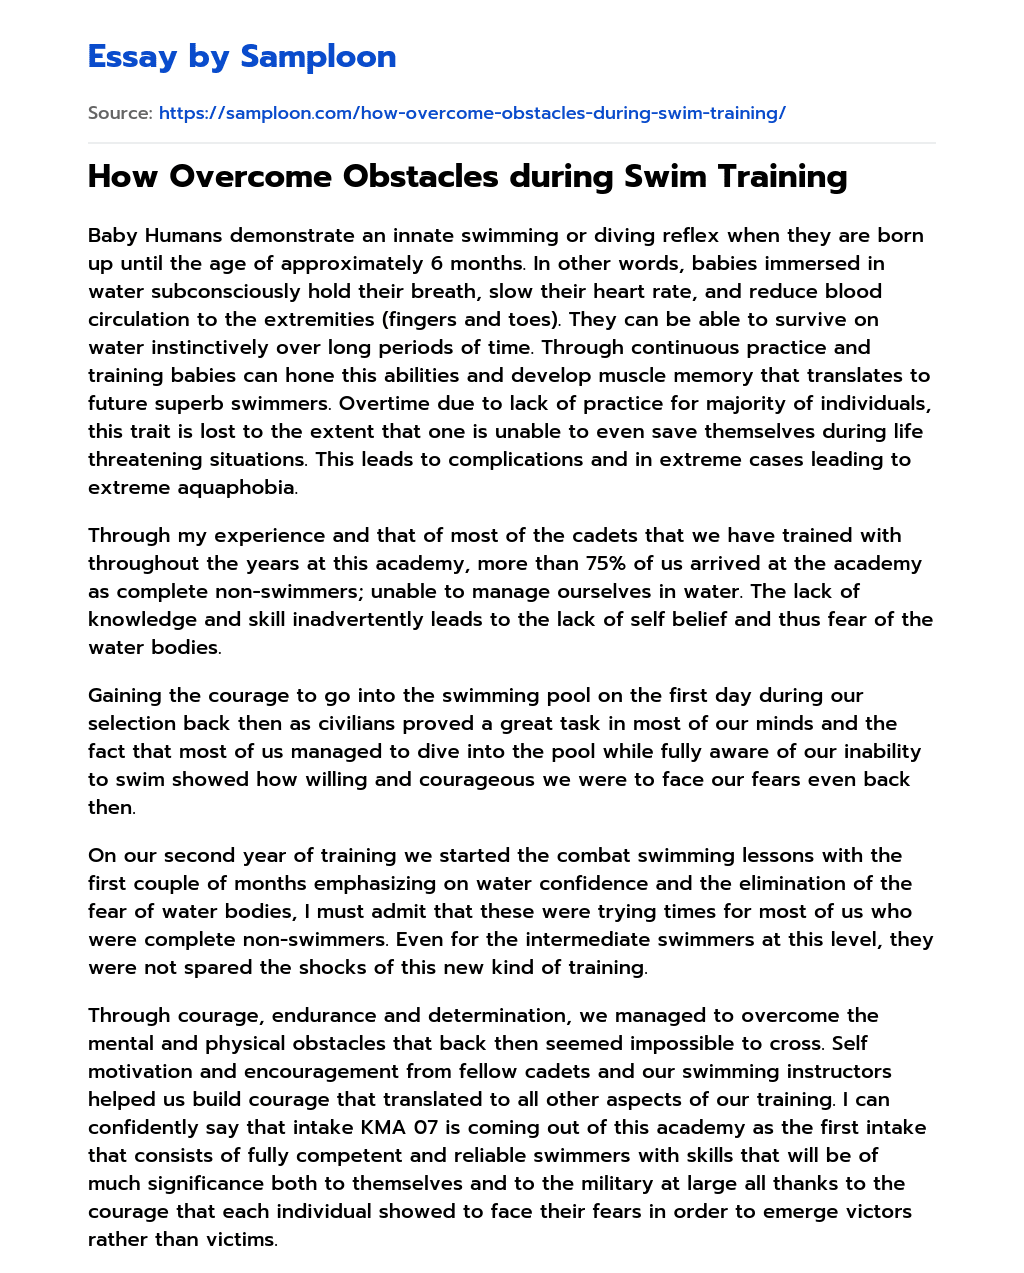 How Overcome Obstacles during Swim Training essay